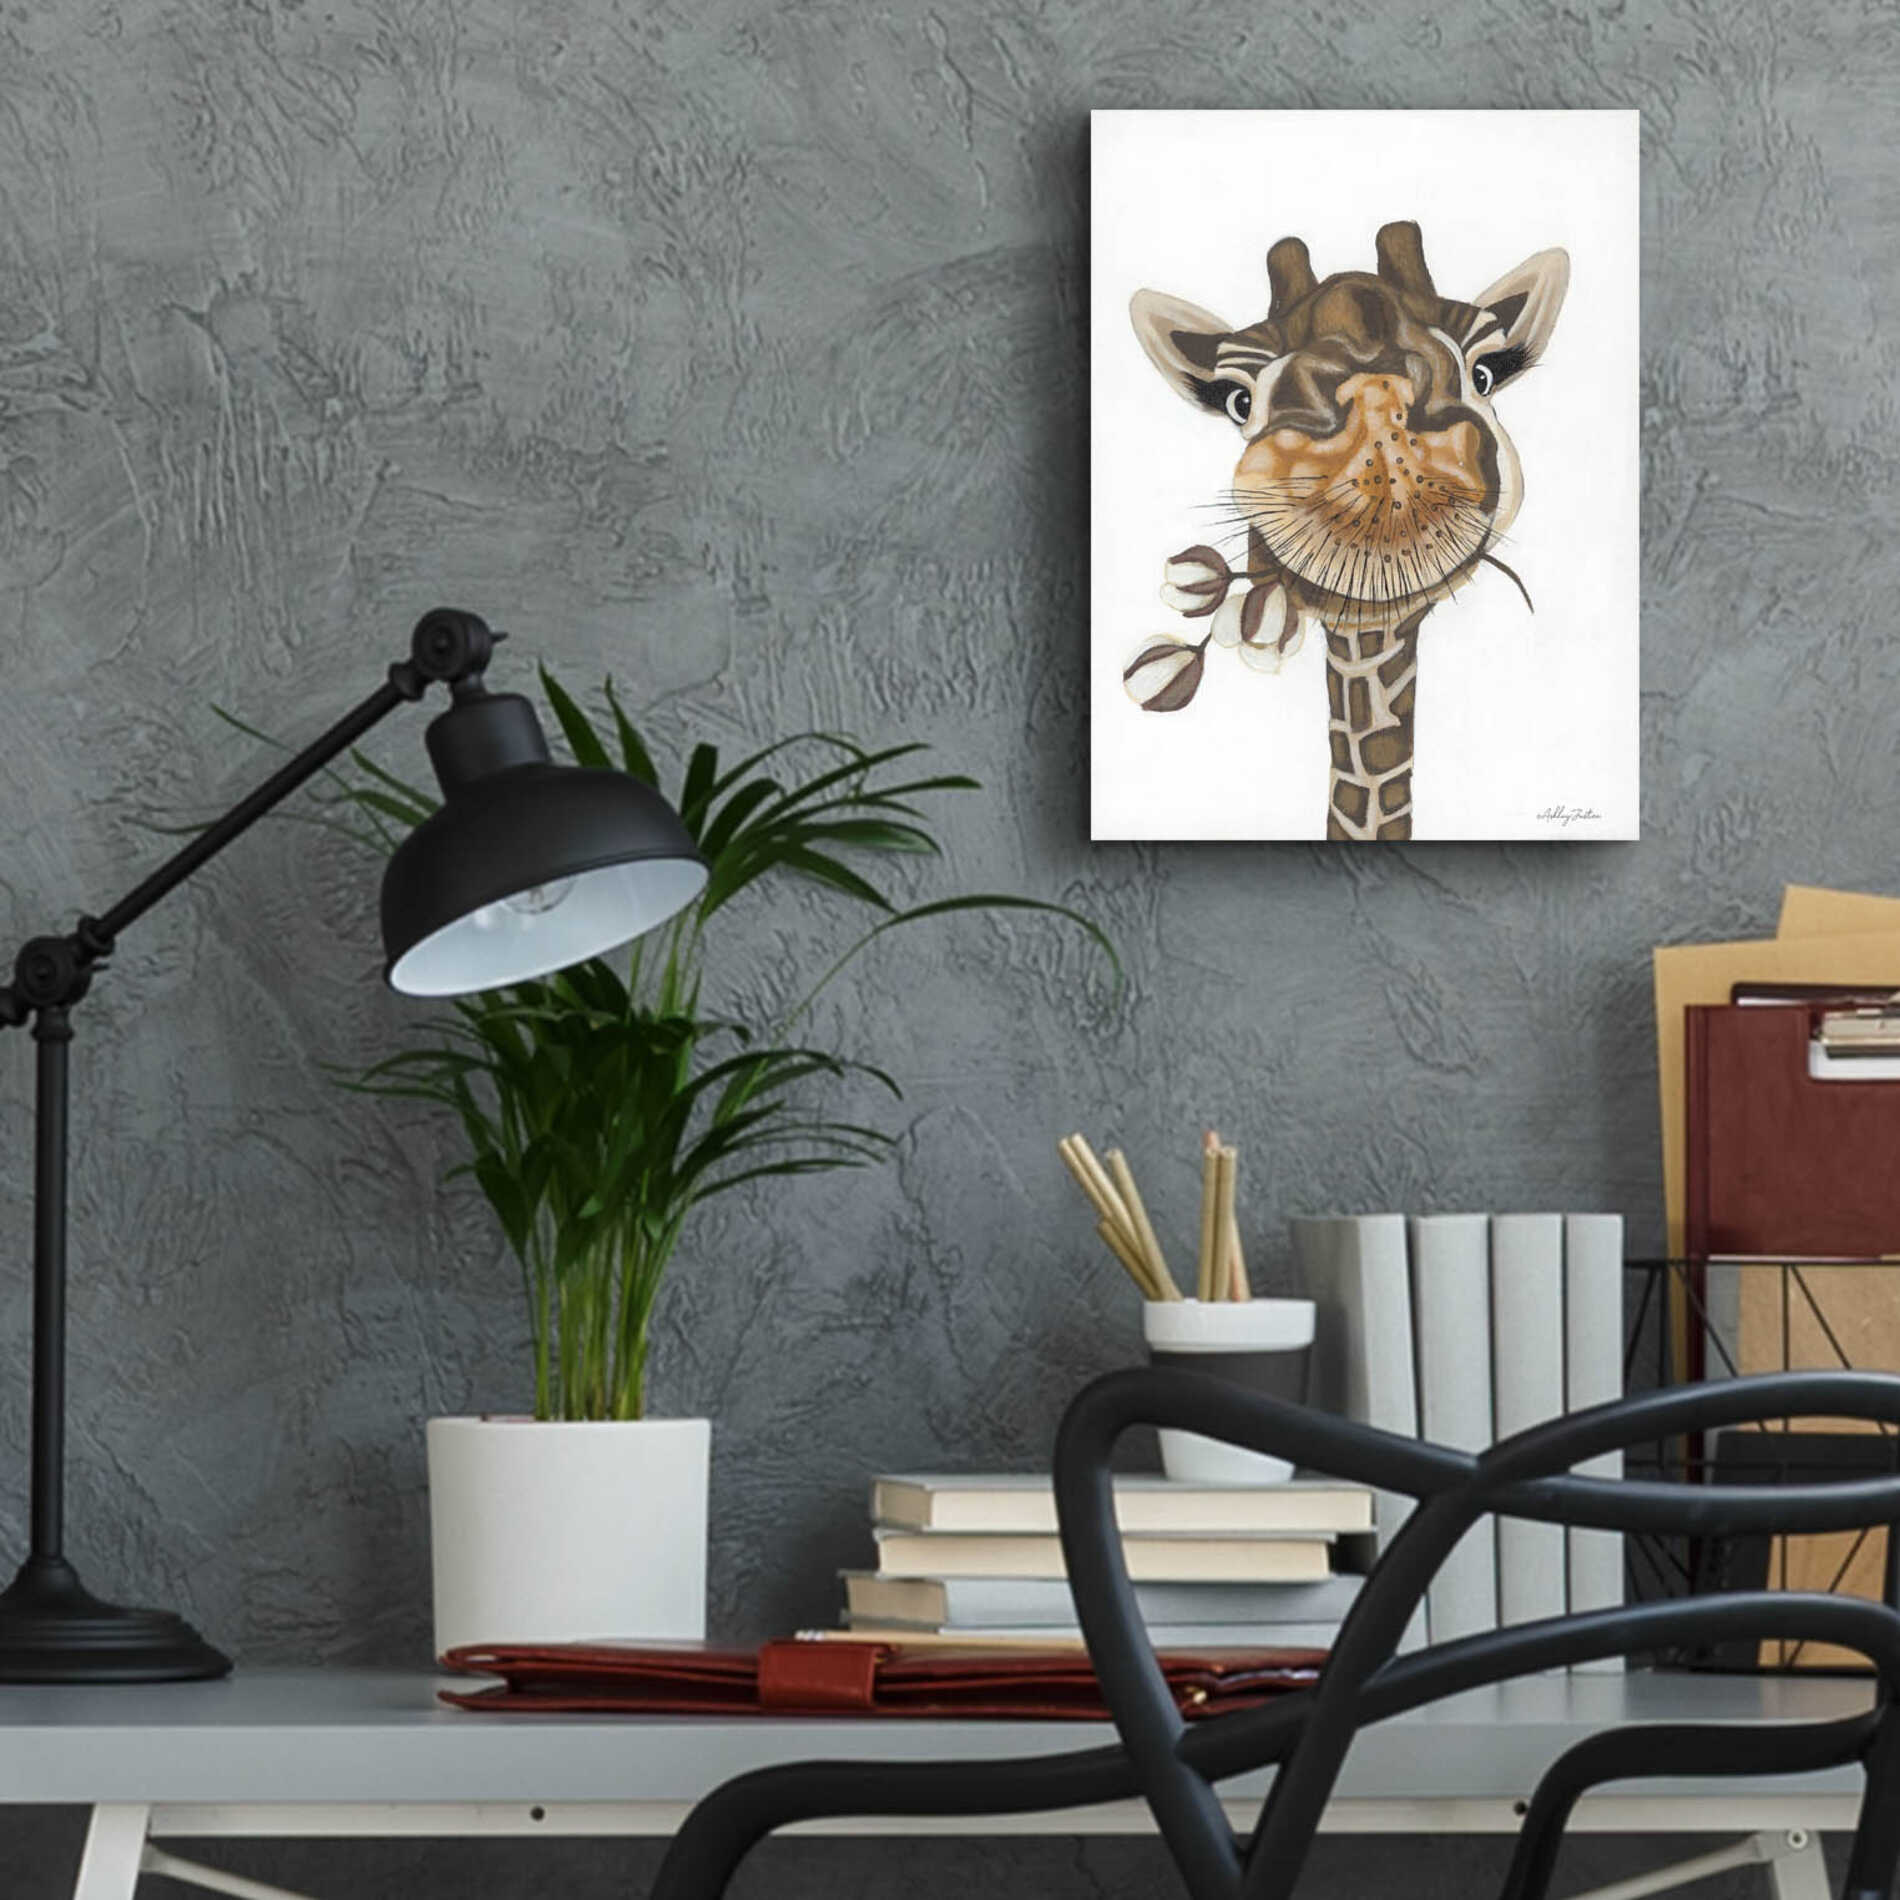 Epic Art 'Giraffe with Cotton' by Ashley Justice, Acrylic Glass Wall Art,12x16